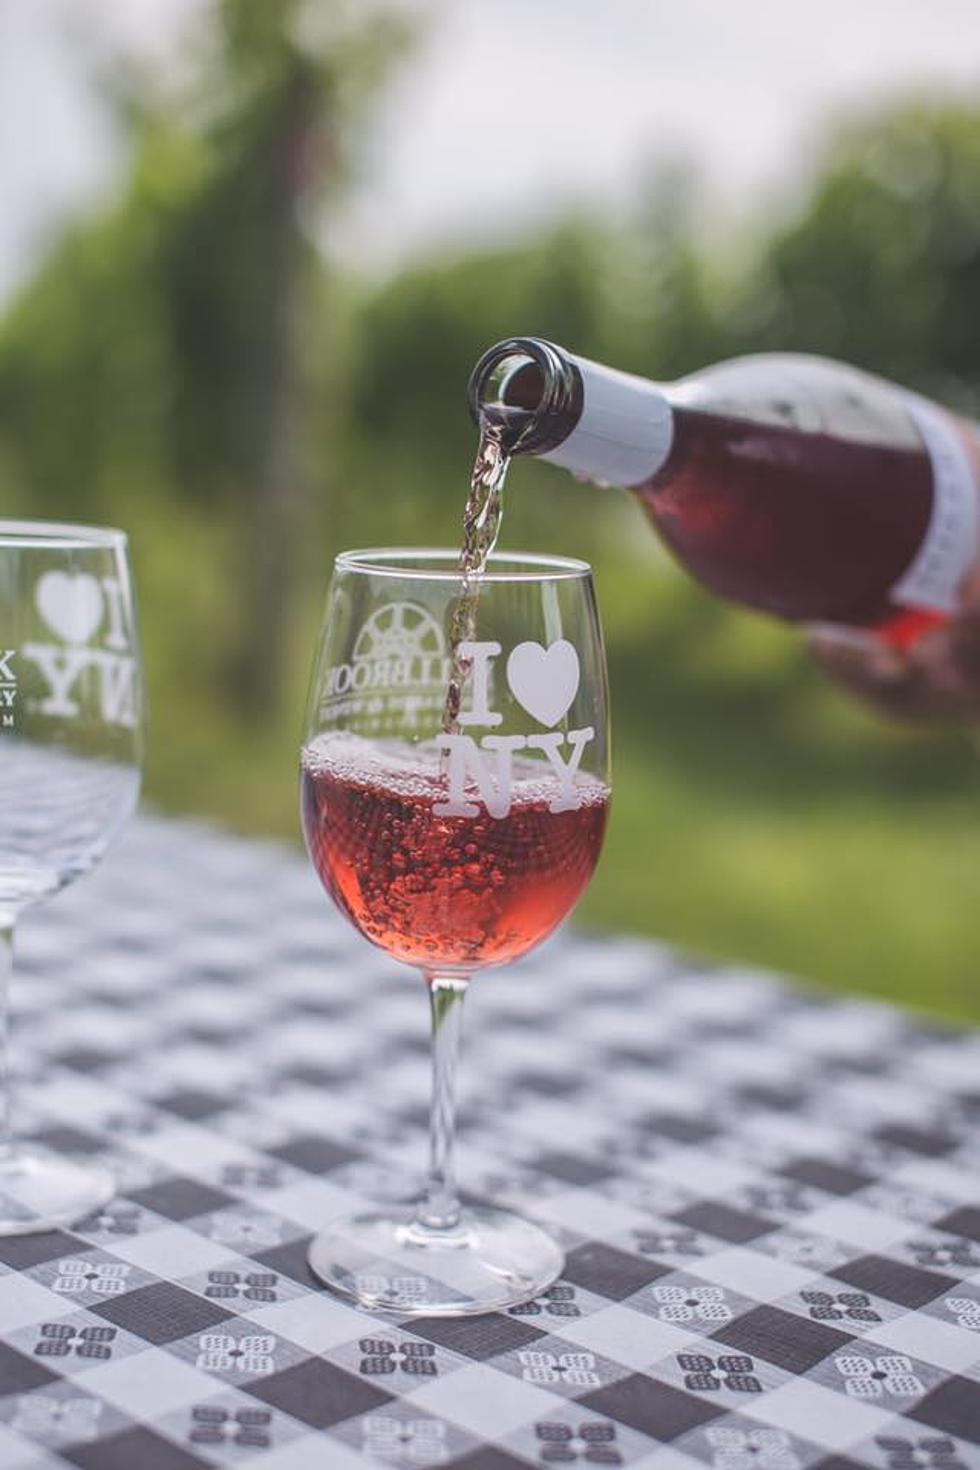 Drink Wine: 5 of the Hudson Valley’s Favorite Local Wines